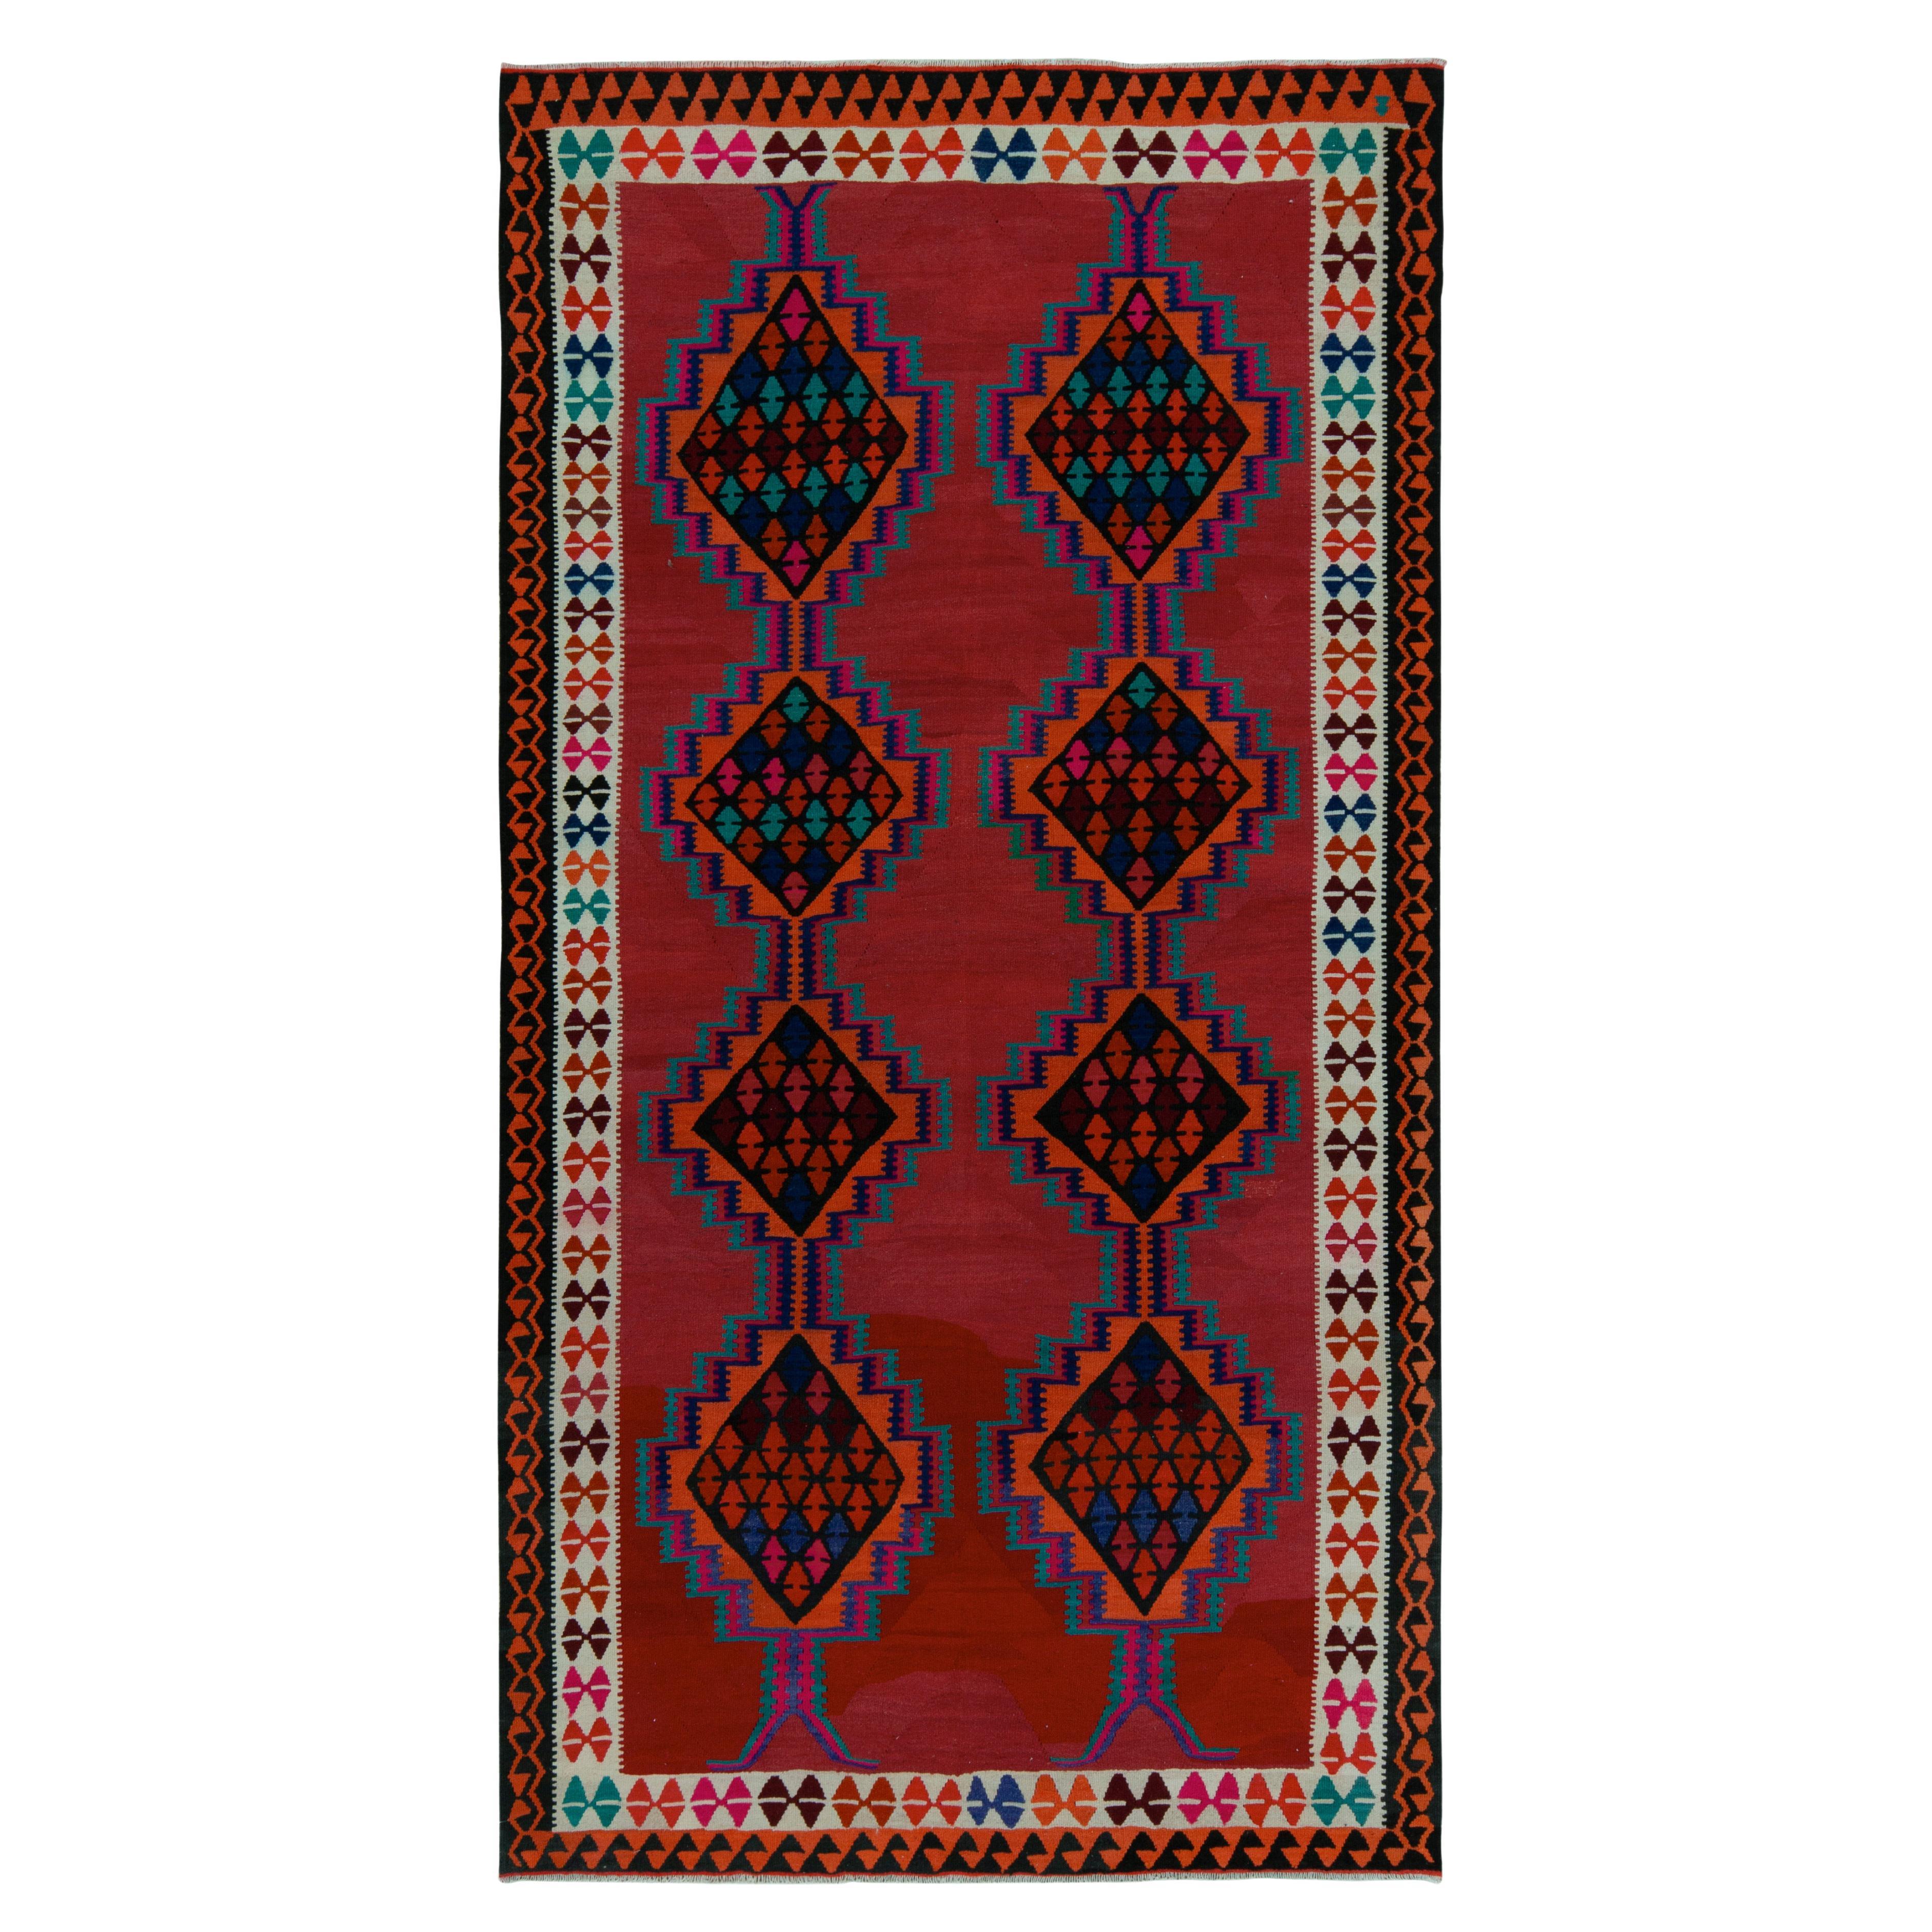 1950s Vintage Kilim Rug in Red with Colorful Geometric Patterns by Rug & Kilim